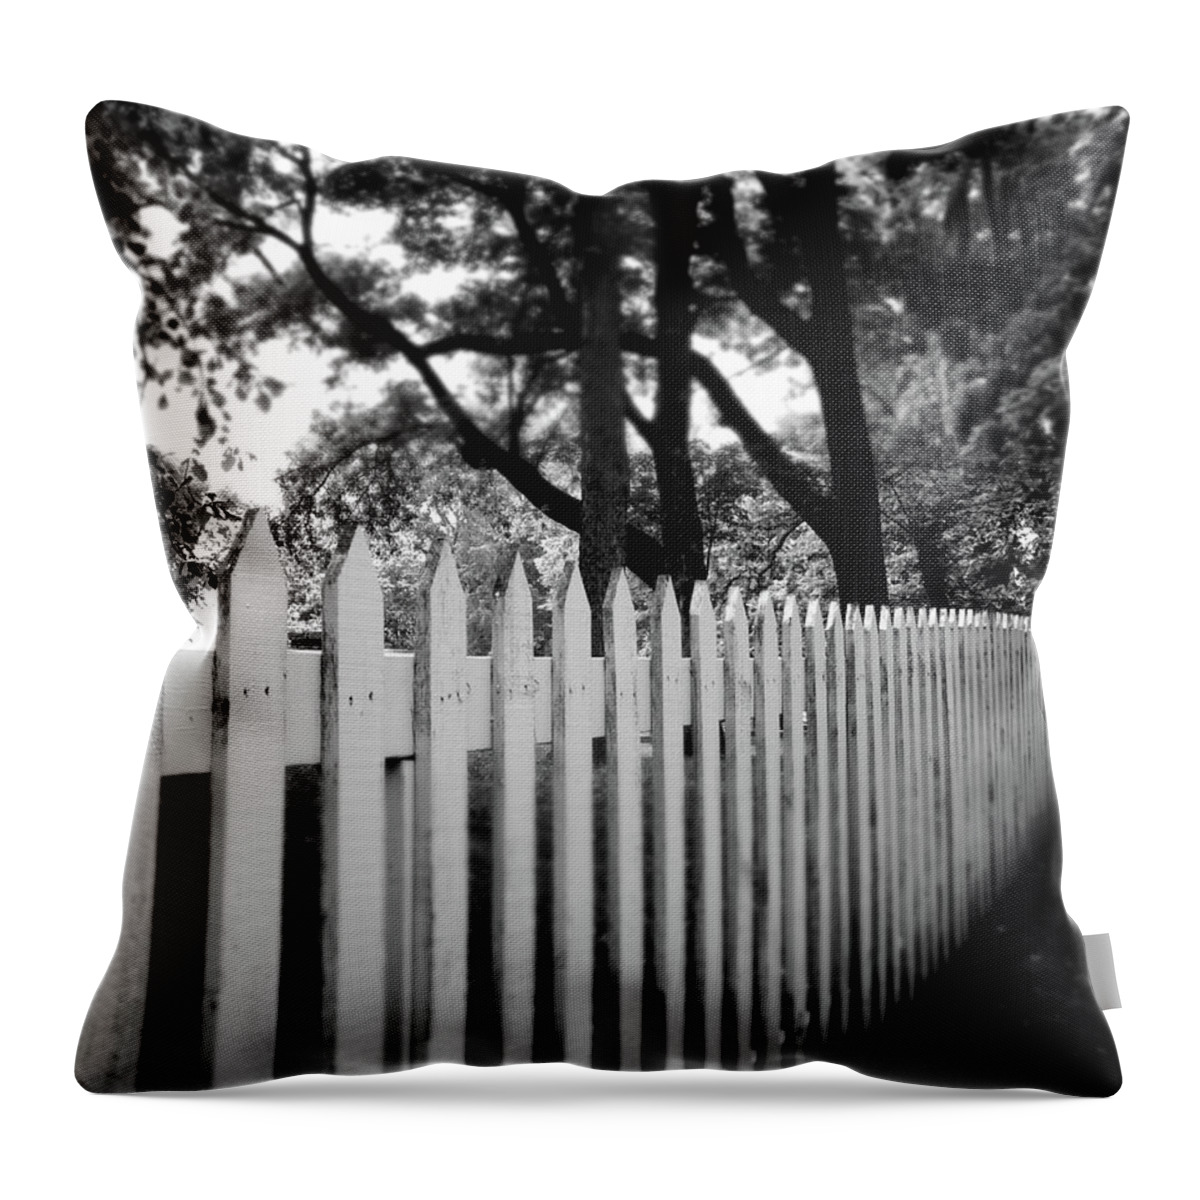 Picket Fence Throw Pillow featuring the photograph White Picket Fence- by Linda Woods by Linda Woods